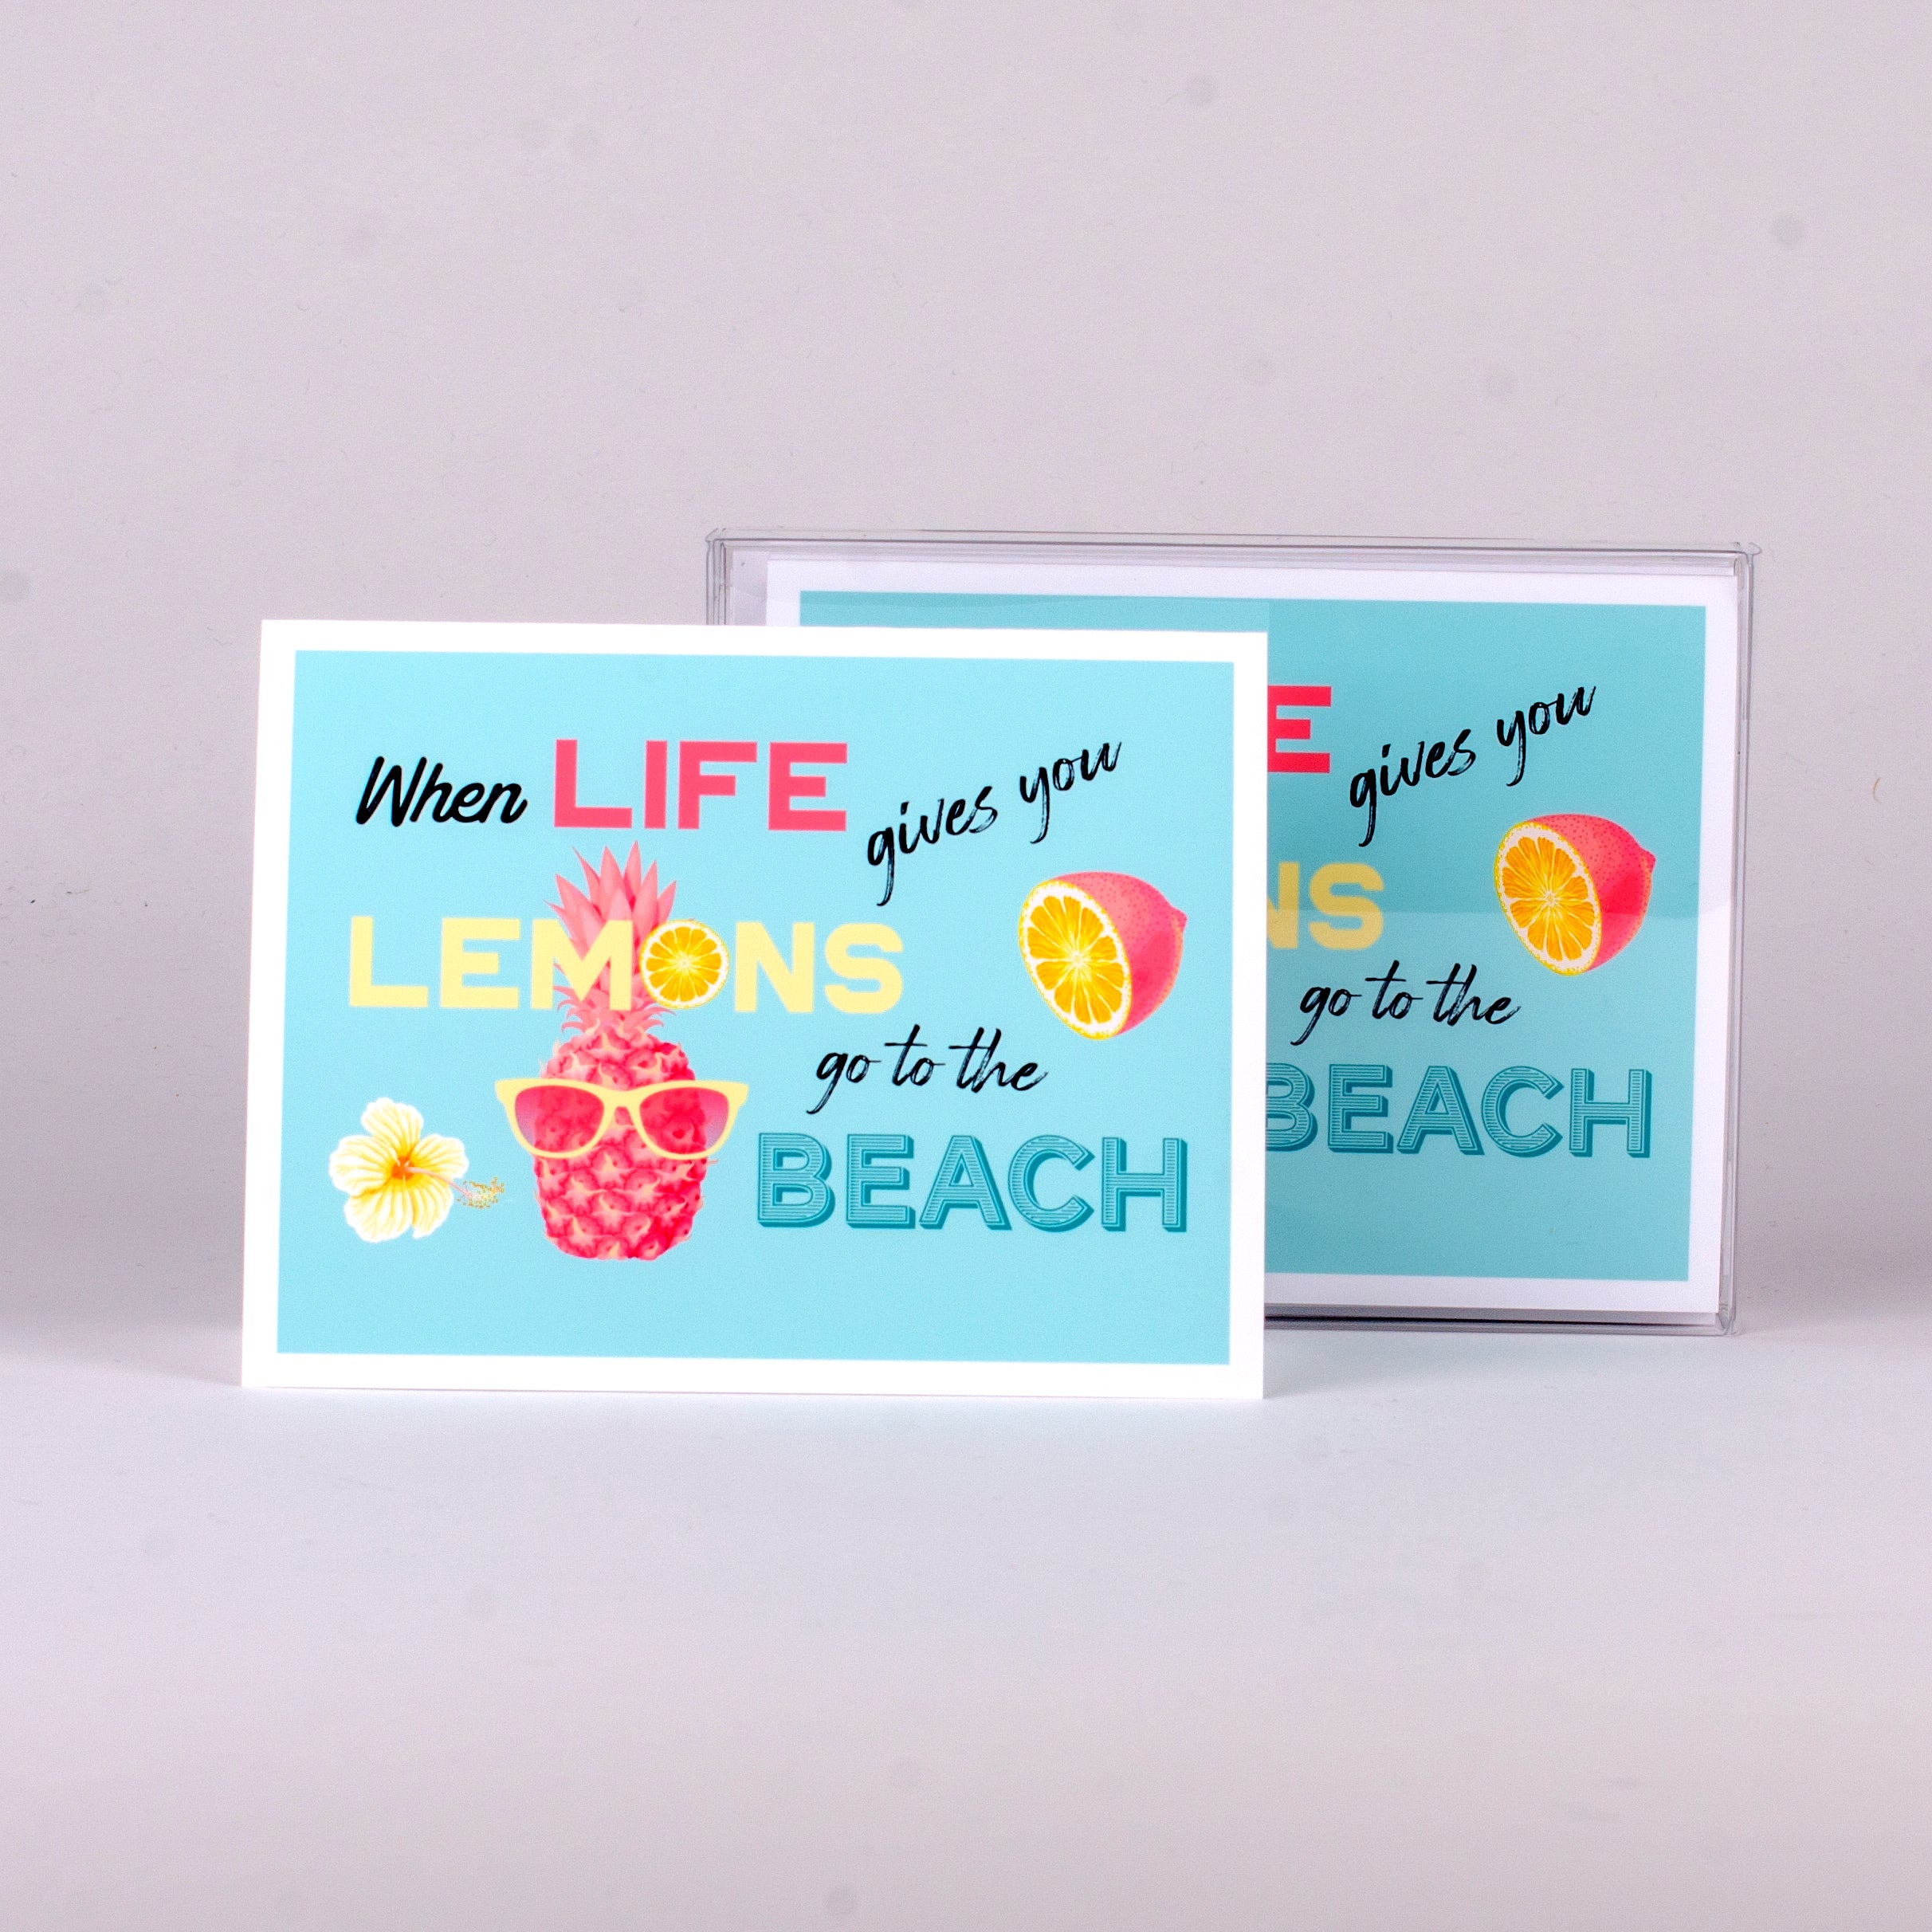 Set of 5 notecards and envelopes on front-When Life gives you Lemons go to the beach (4"x5.25")